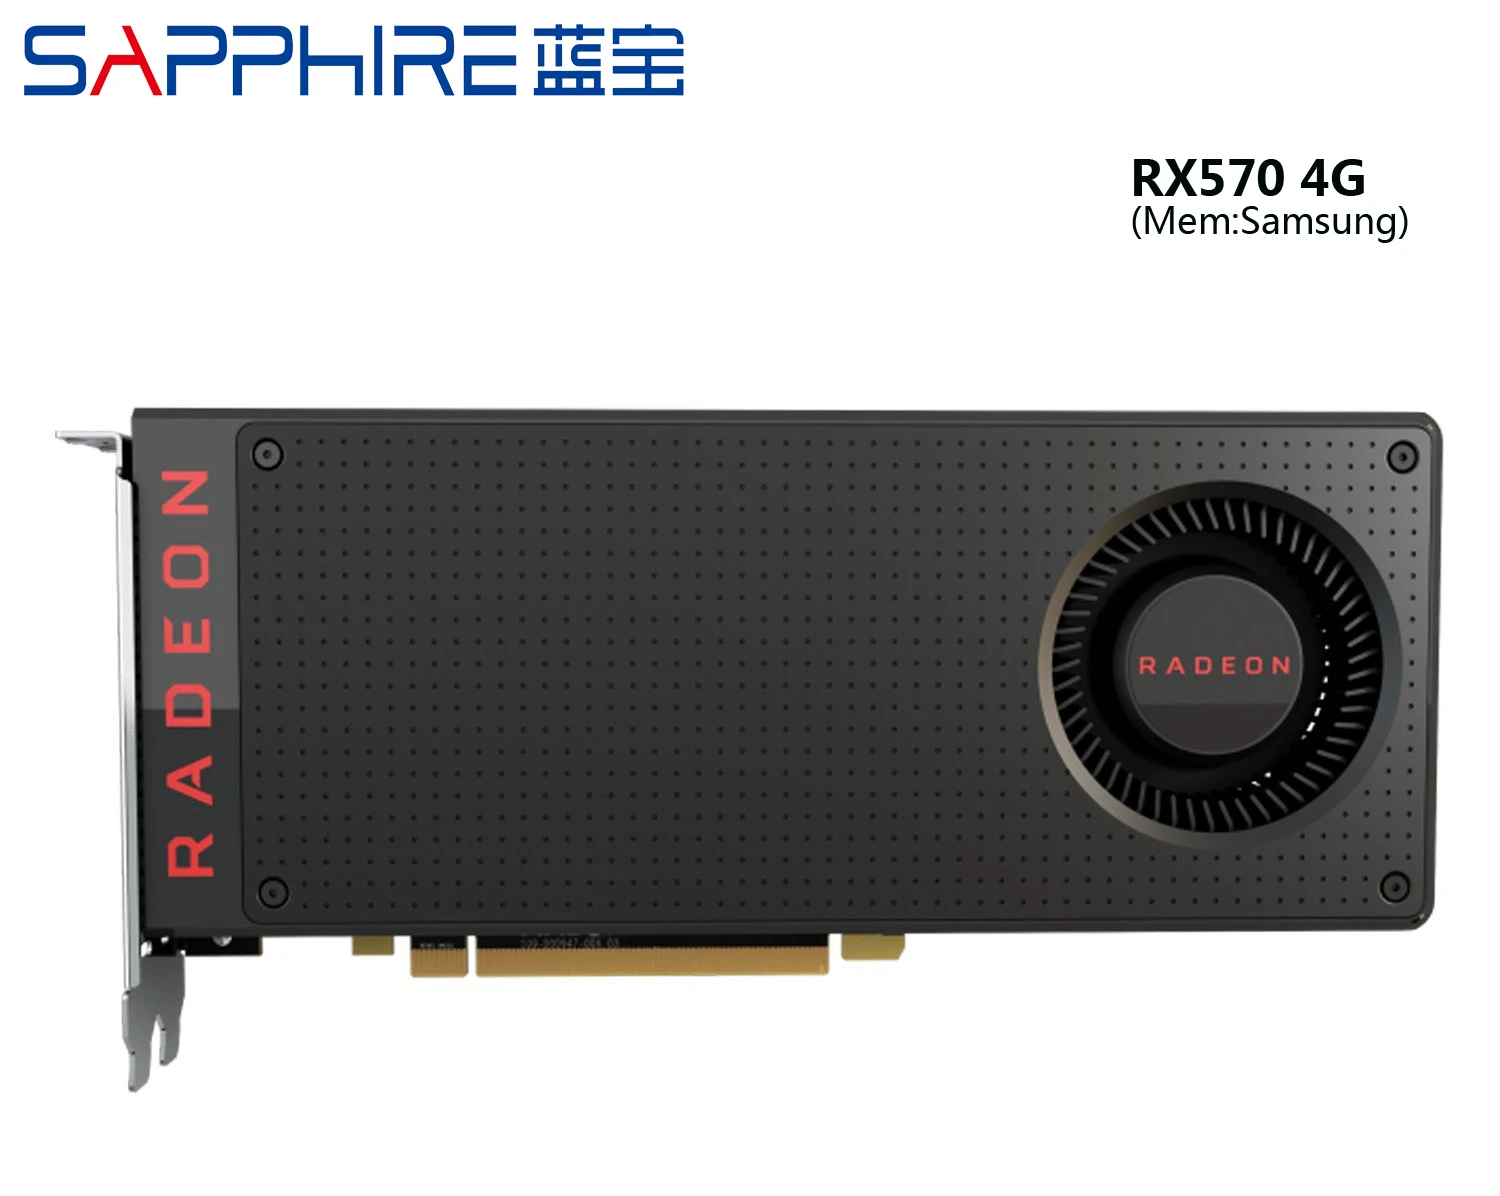 best graphics card for pc USED,Sapphire RX 570 4G graphics cards 7000MHz GDDR5 256bits HDMI+DP*3 PCI-X16,100% tested good video card for pc